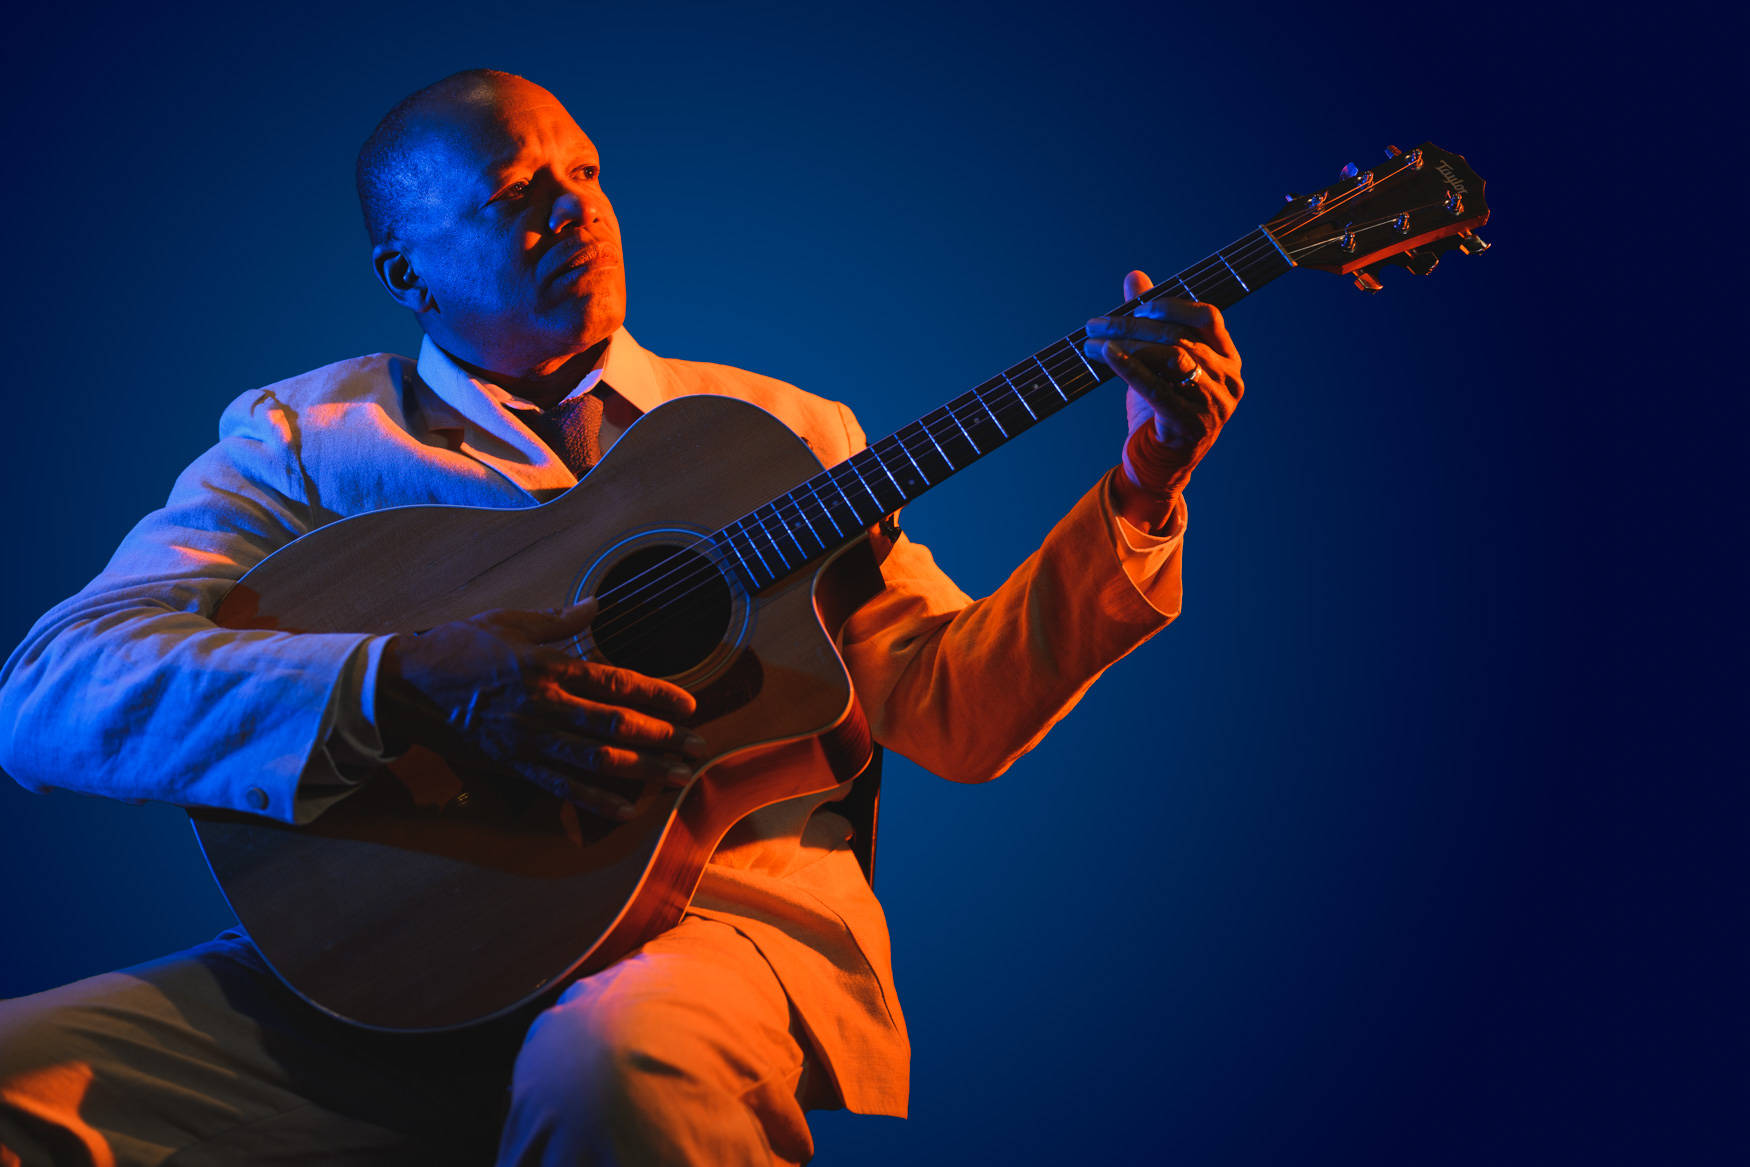 Download Lonnie Johnson With A Guitar On A Dark Blue Wallpaper | Wallpapers .com